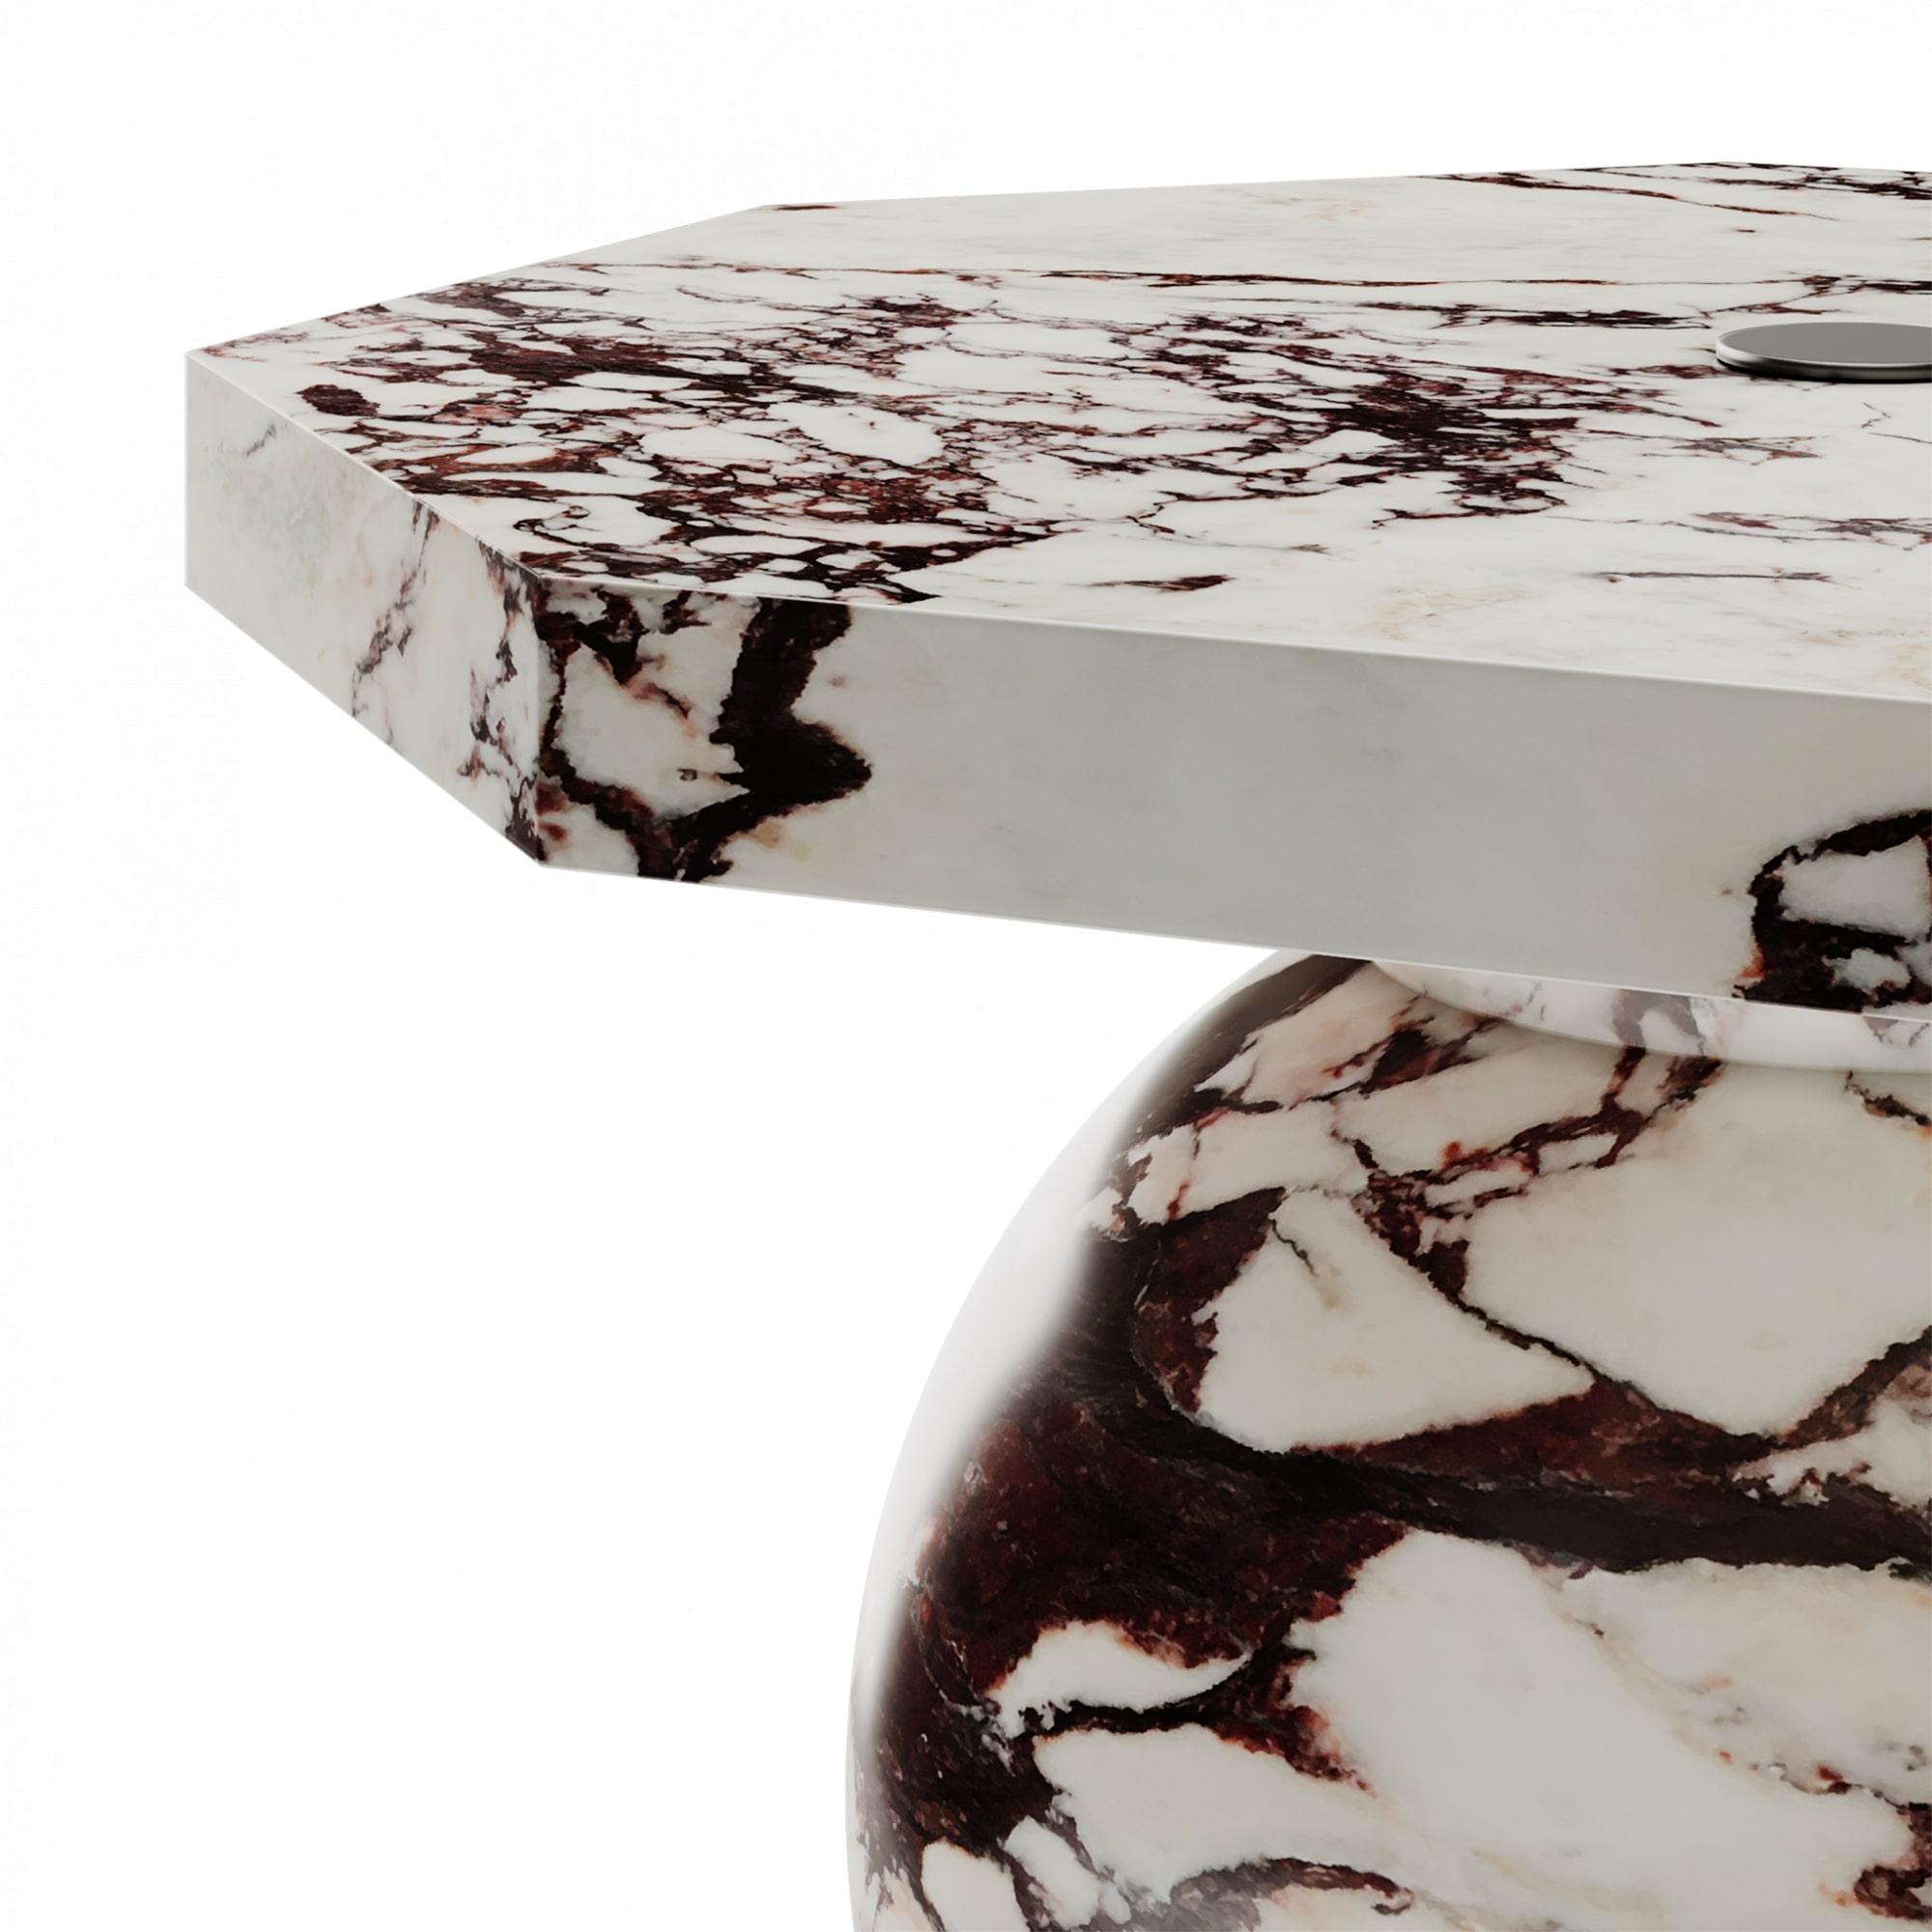 Modern outdoor pollock sphere side table Parasol base polished Calacatta marble

Pollock side table is an outdoor side table that duals as a bold parasol base. It is perfect for those sunny days and private sunset parties since it combines